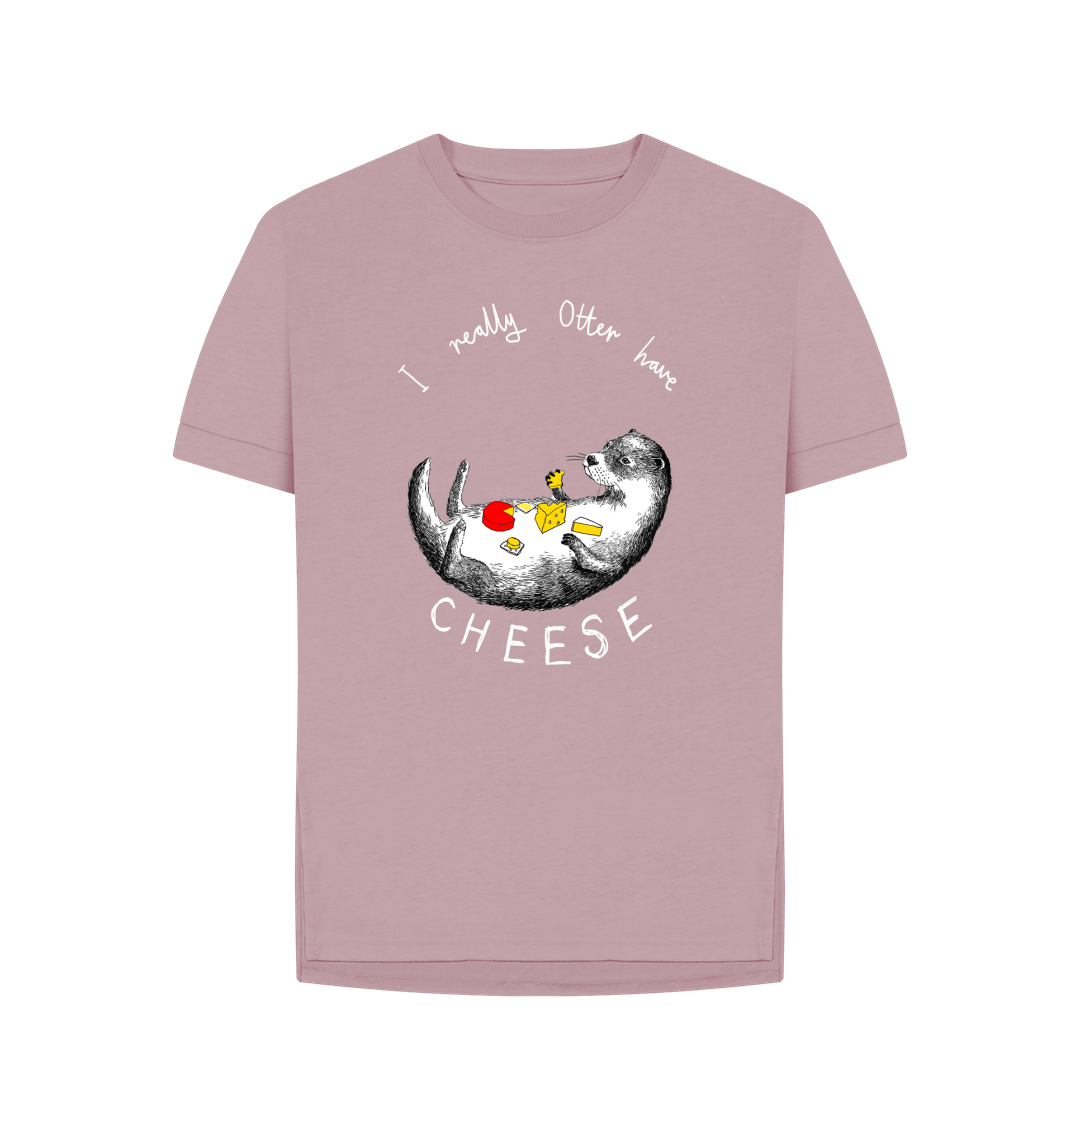 Mauve 'I Really Otter Have Cheese!' Women's T-shirt